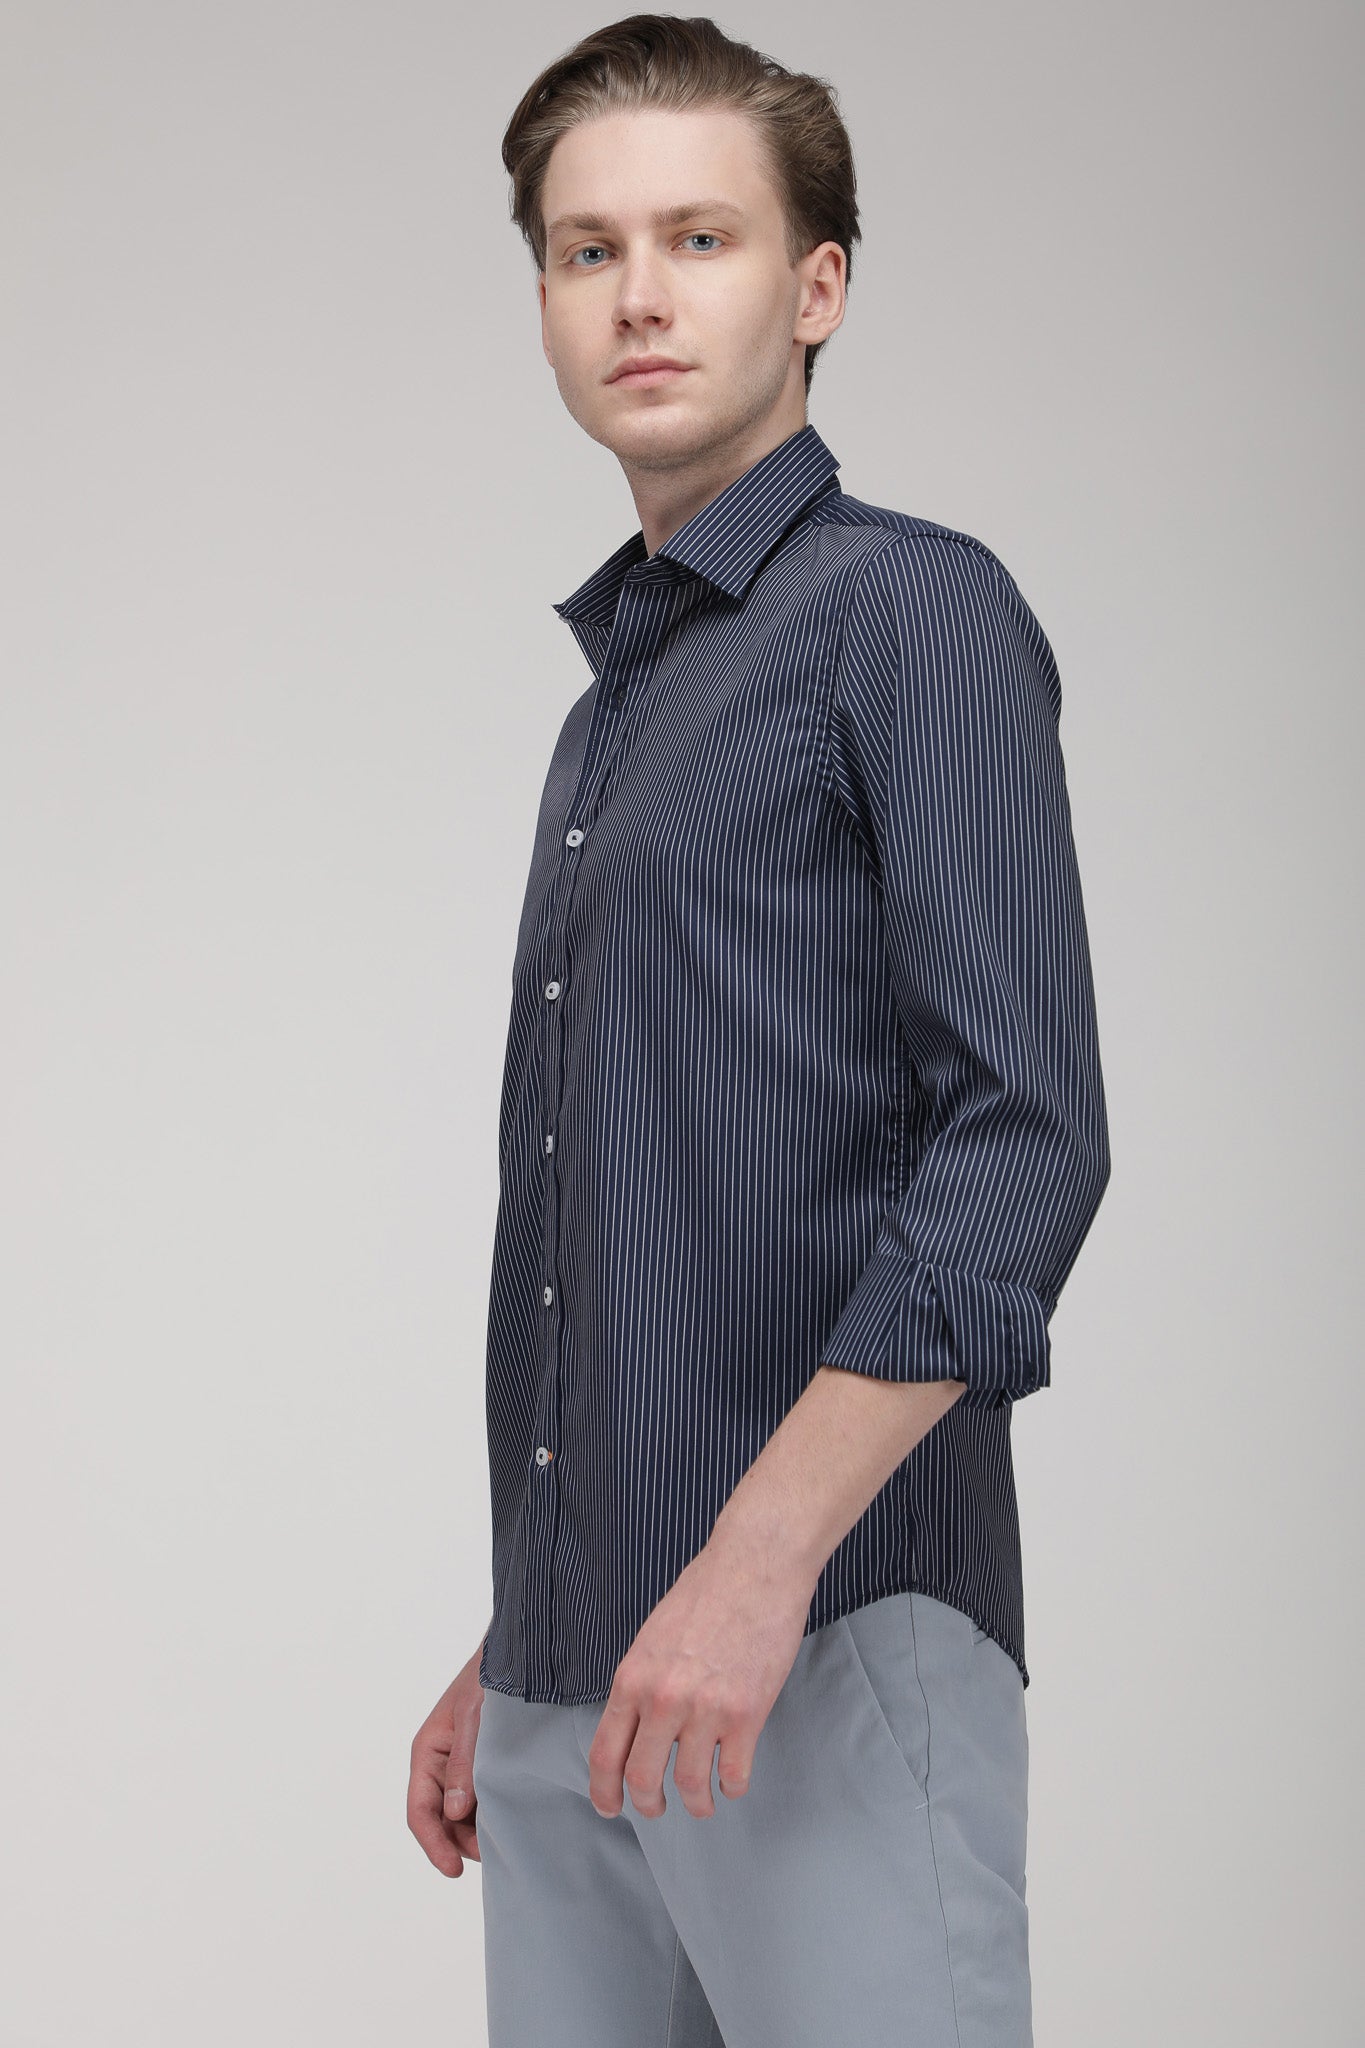 Bare Brown Striped Slim Fit Cotton Shirt with Full Sleeves - Dark Navy